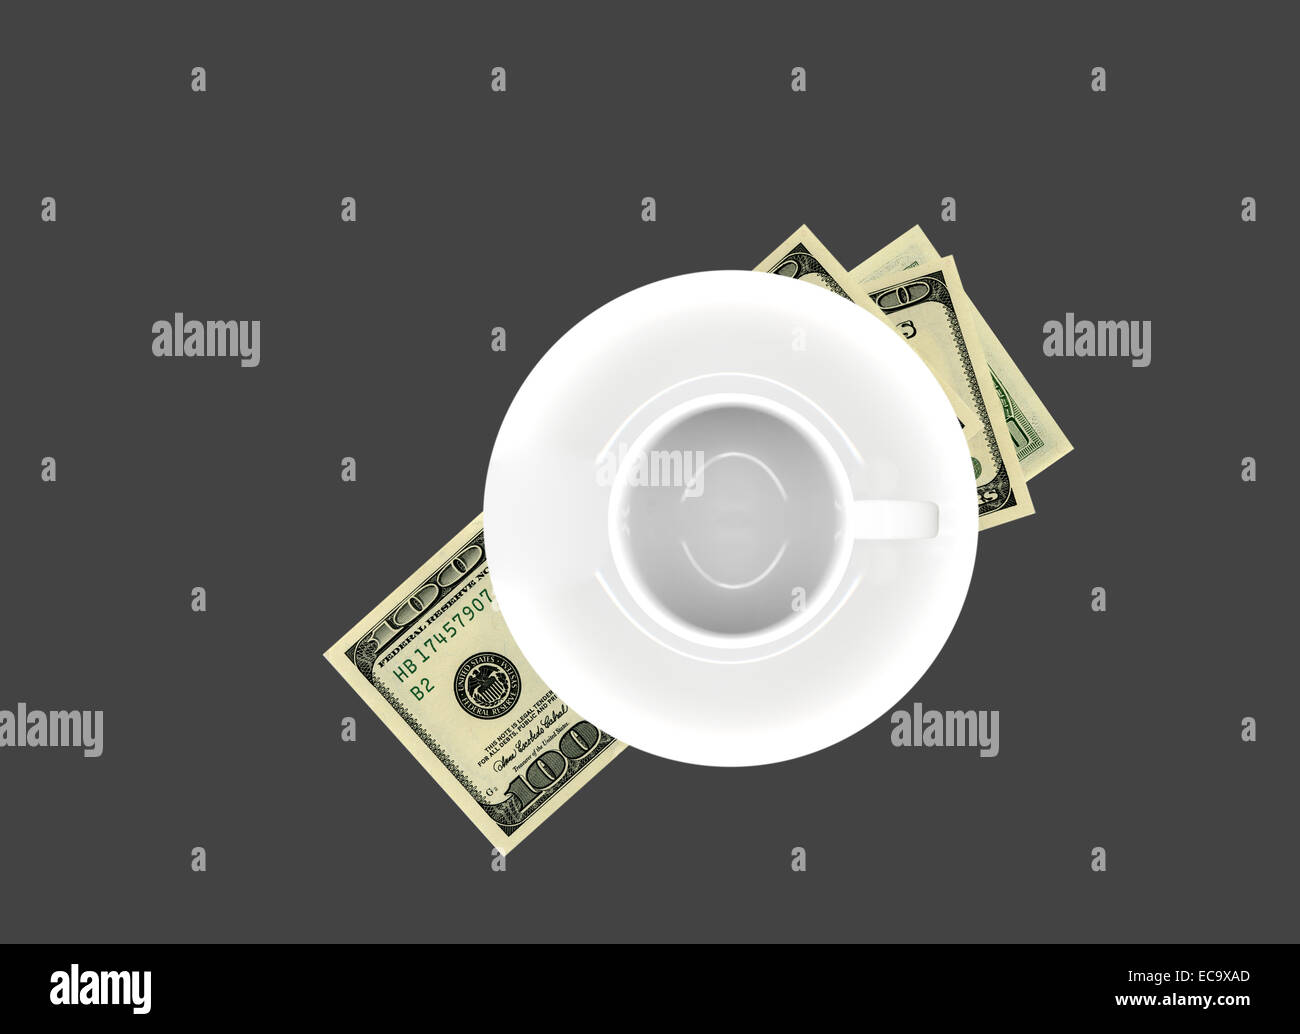 Empty white porcelain cup and saucer over United States $100 bills on dark gray background. Stock Photo